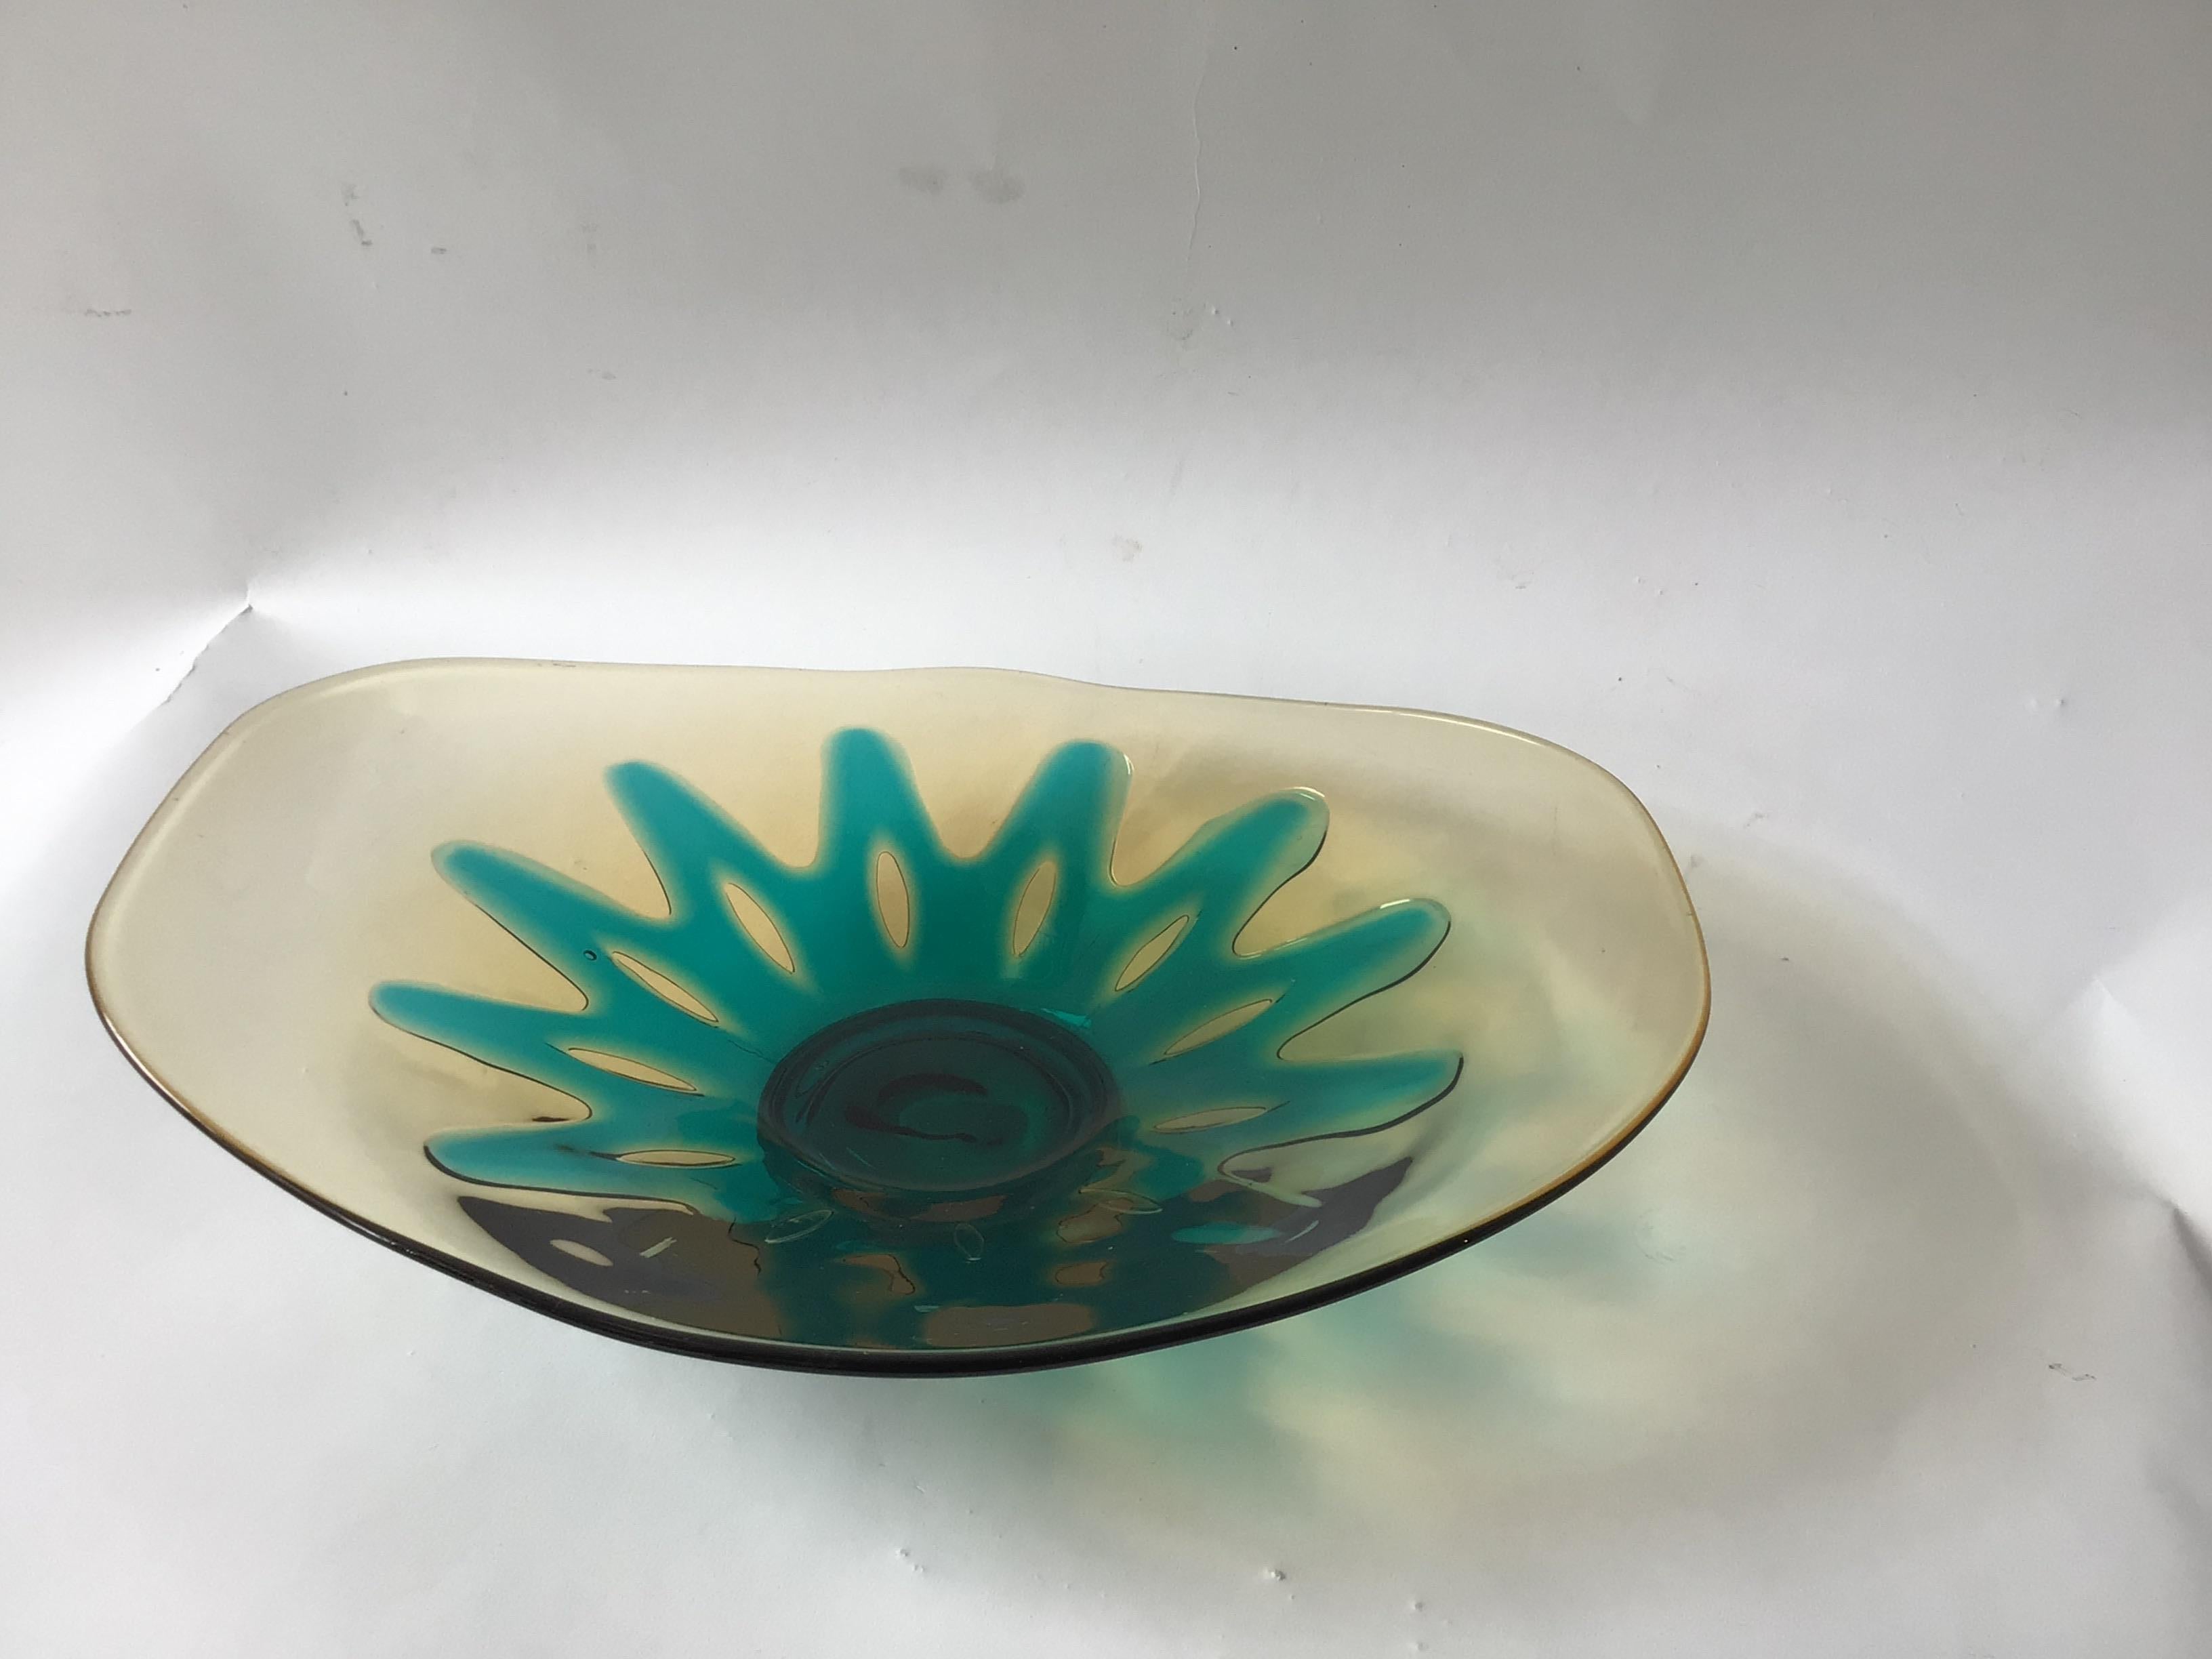 1960s Murano glass bowl with a sunburst design in the middle.